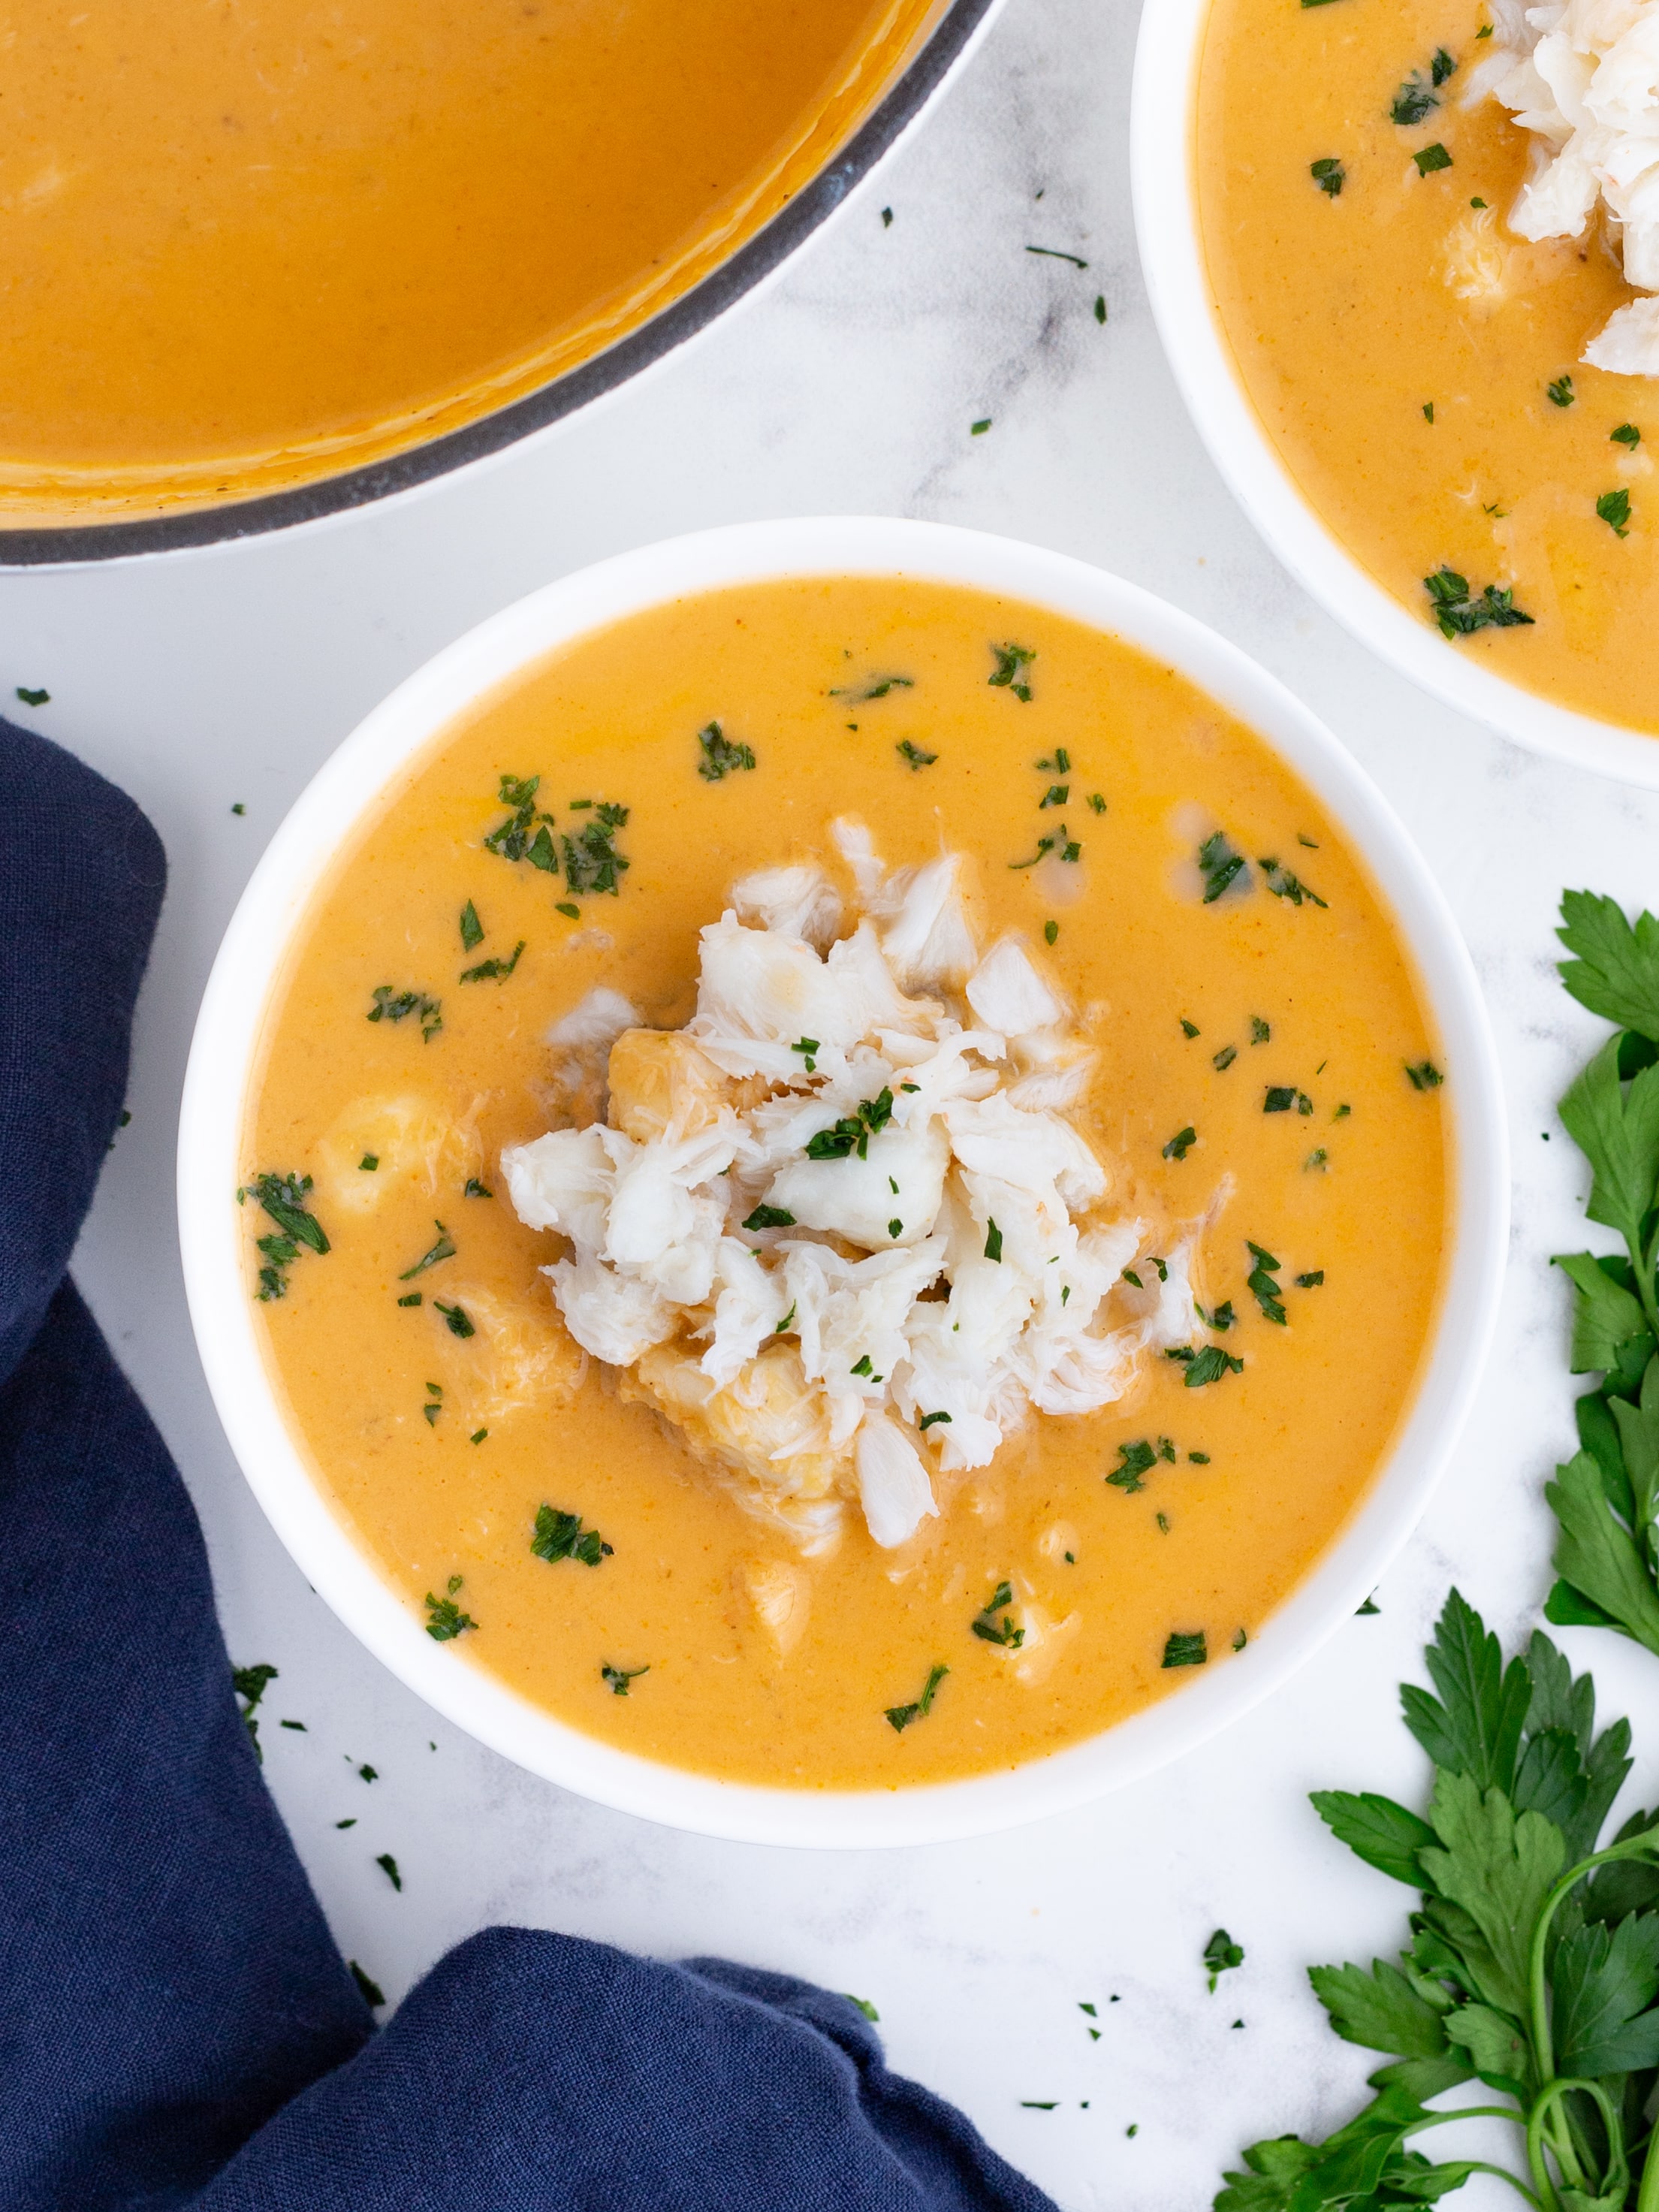 Take your Christmas dinner up a notch with this sophisticated, creamy crab  bisque